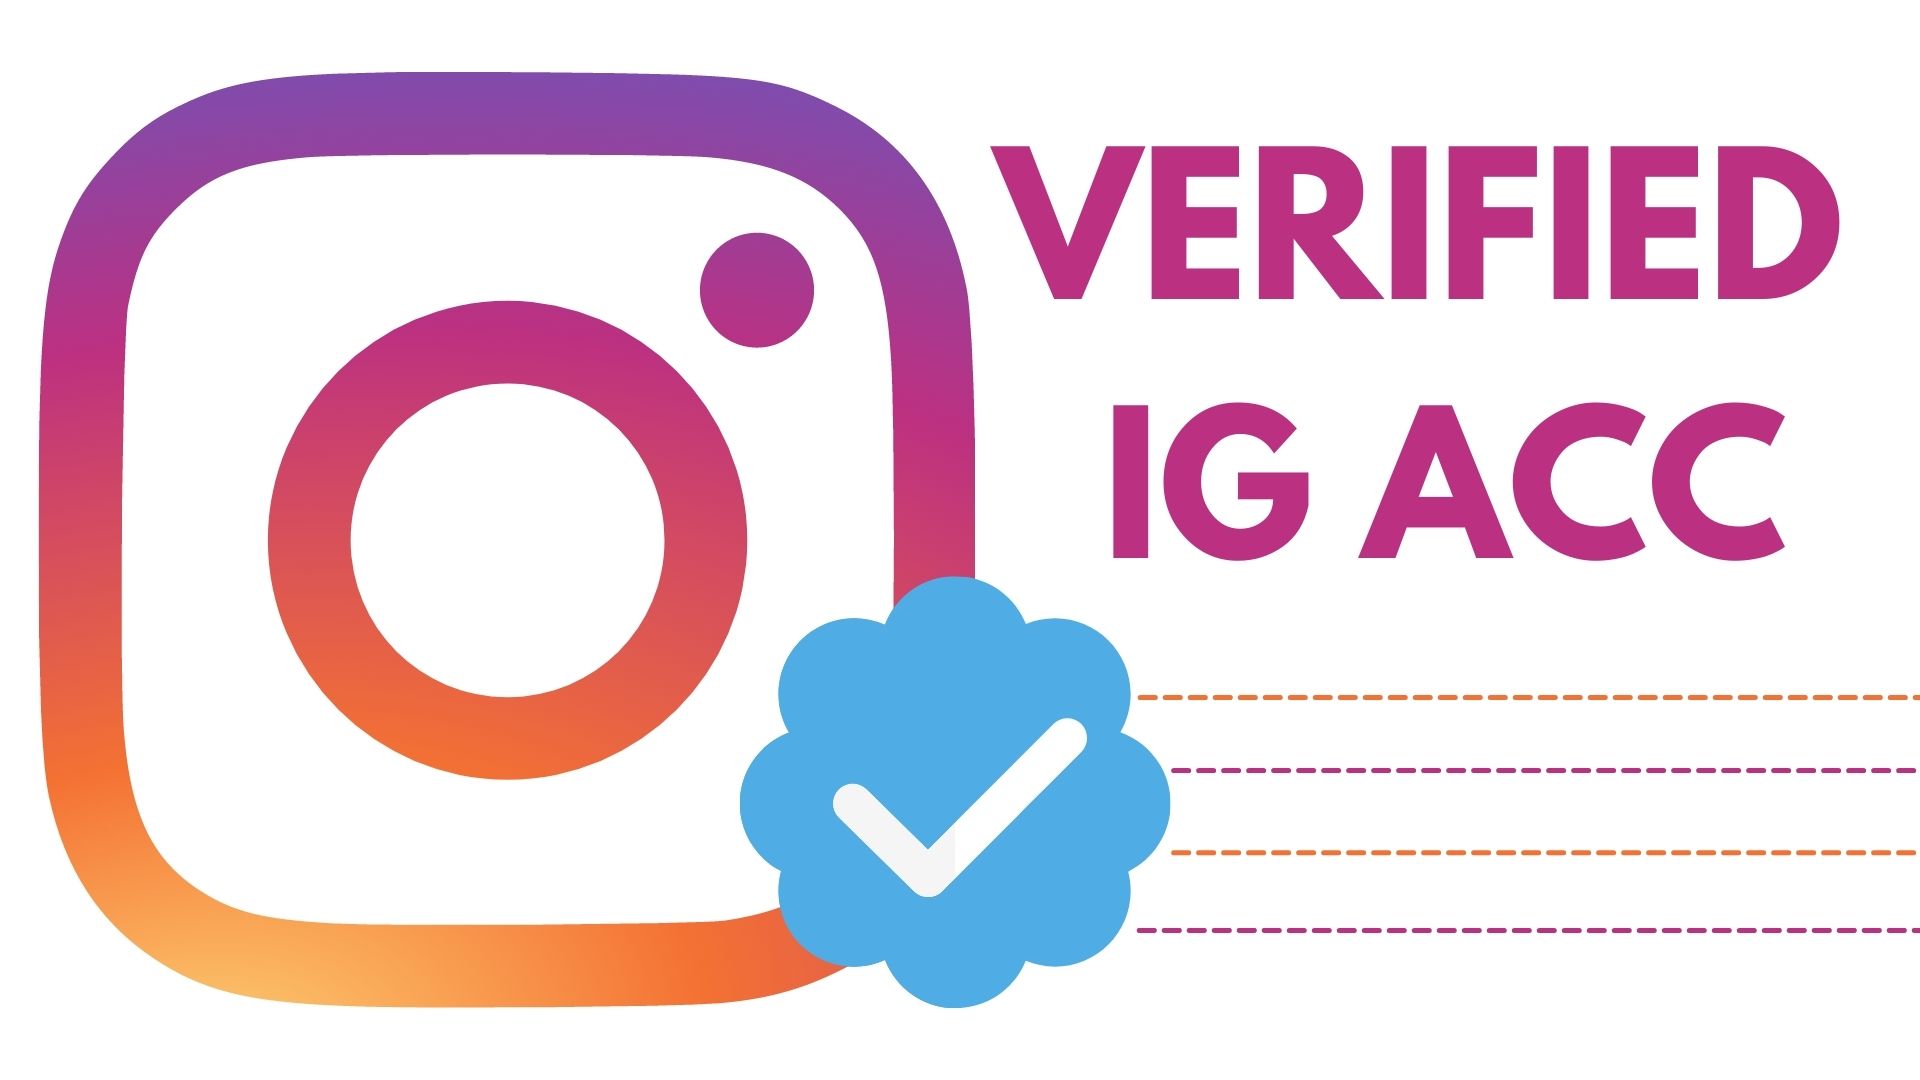 How To Get Verified On Instagram 